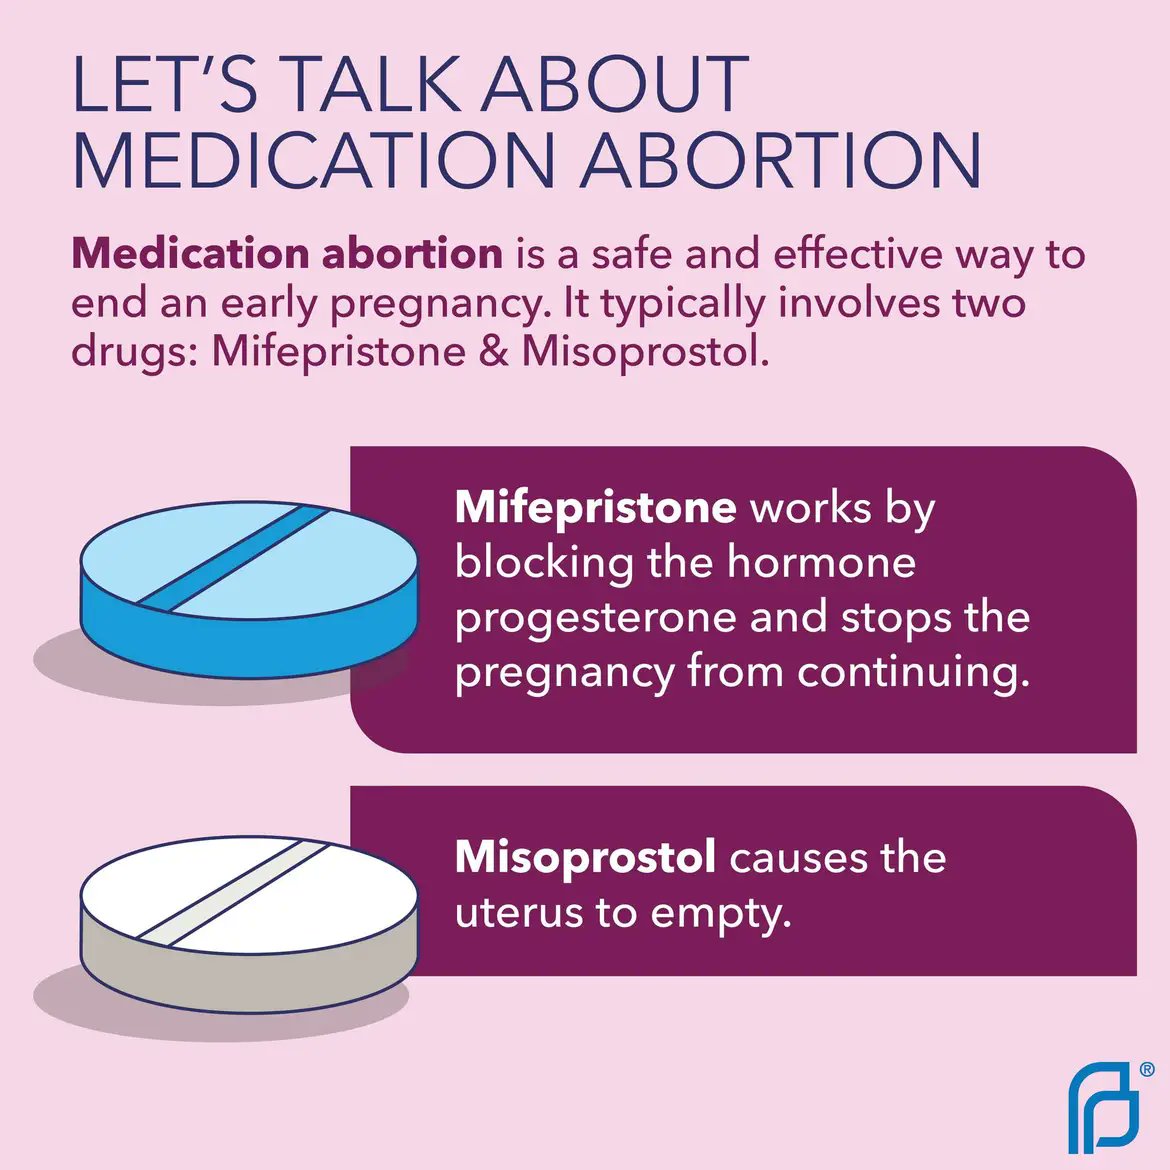 Proud to be a  co-sponsor of @AlexisSimpsonNH ‘s HCR11, condemning medically unnecessary restrictions on medication abortion. It passed the NH House today with bipartisan support! Medication abortion is an essential option for allowing those who need abortion care to have it in